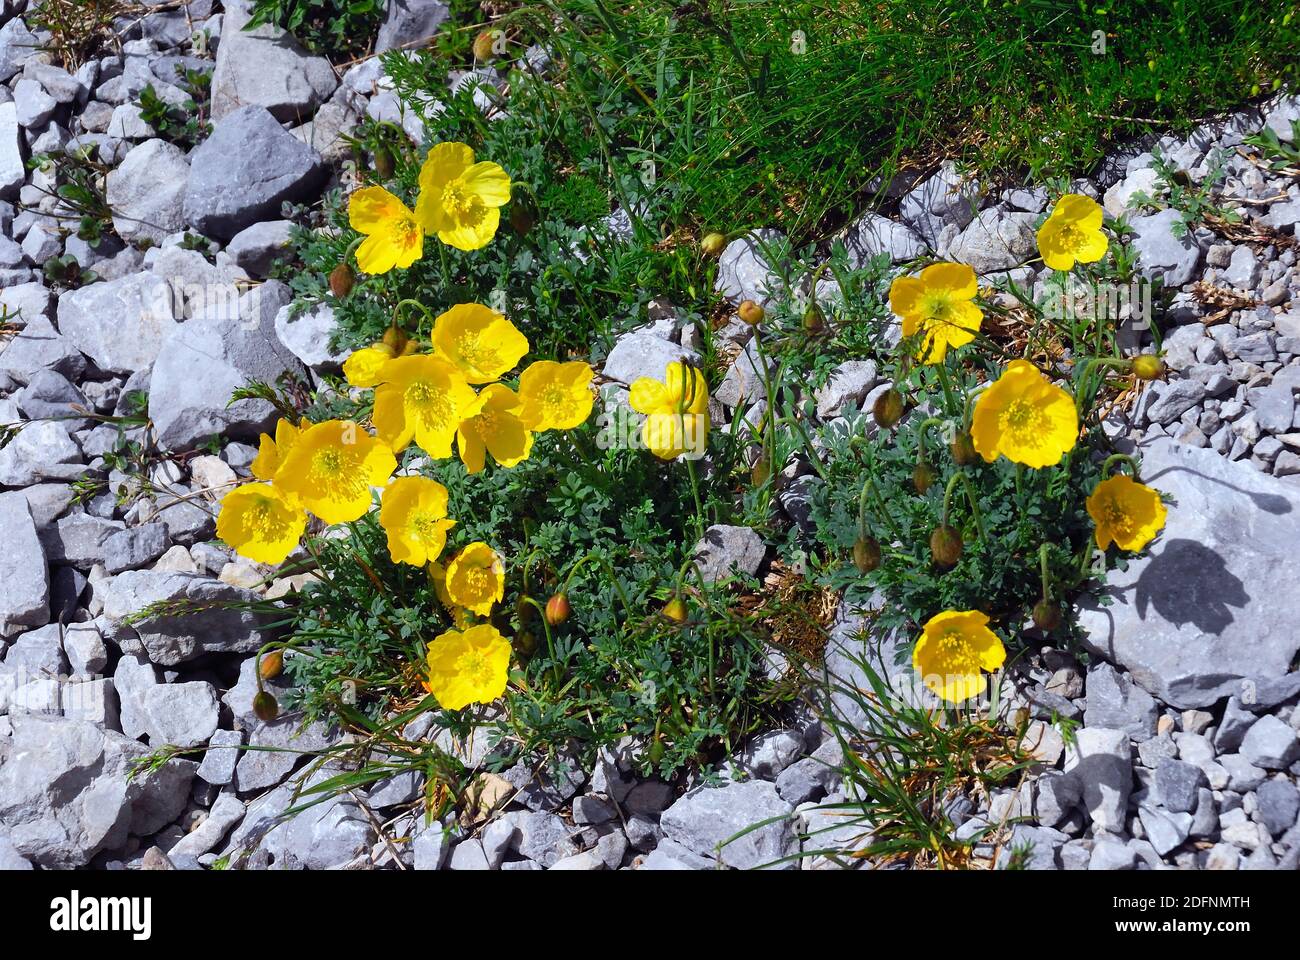 Carnic Apls, Volaia pass.  during WWI it was the scene of bloody battles from Italian and Austro-Hungarian armies. Ranunculus auricomus along the path. Stock Photo